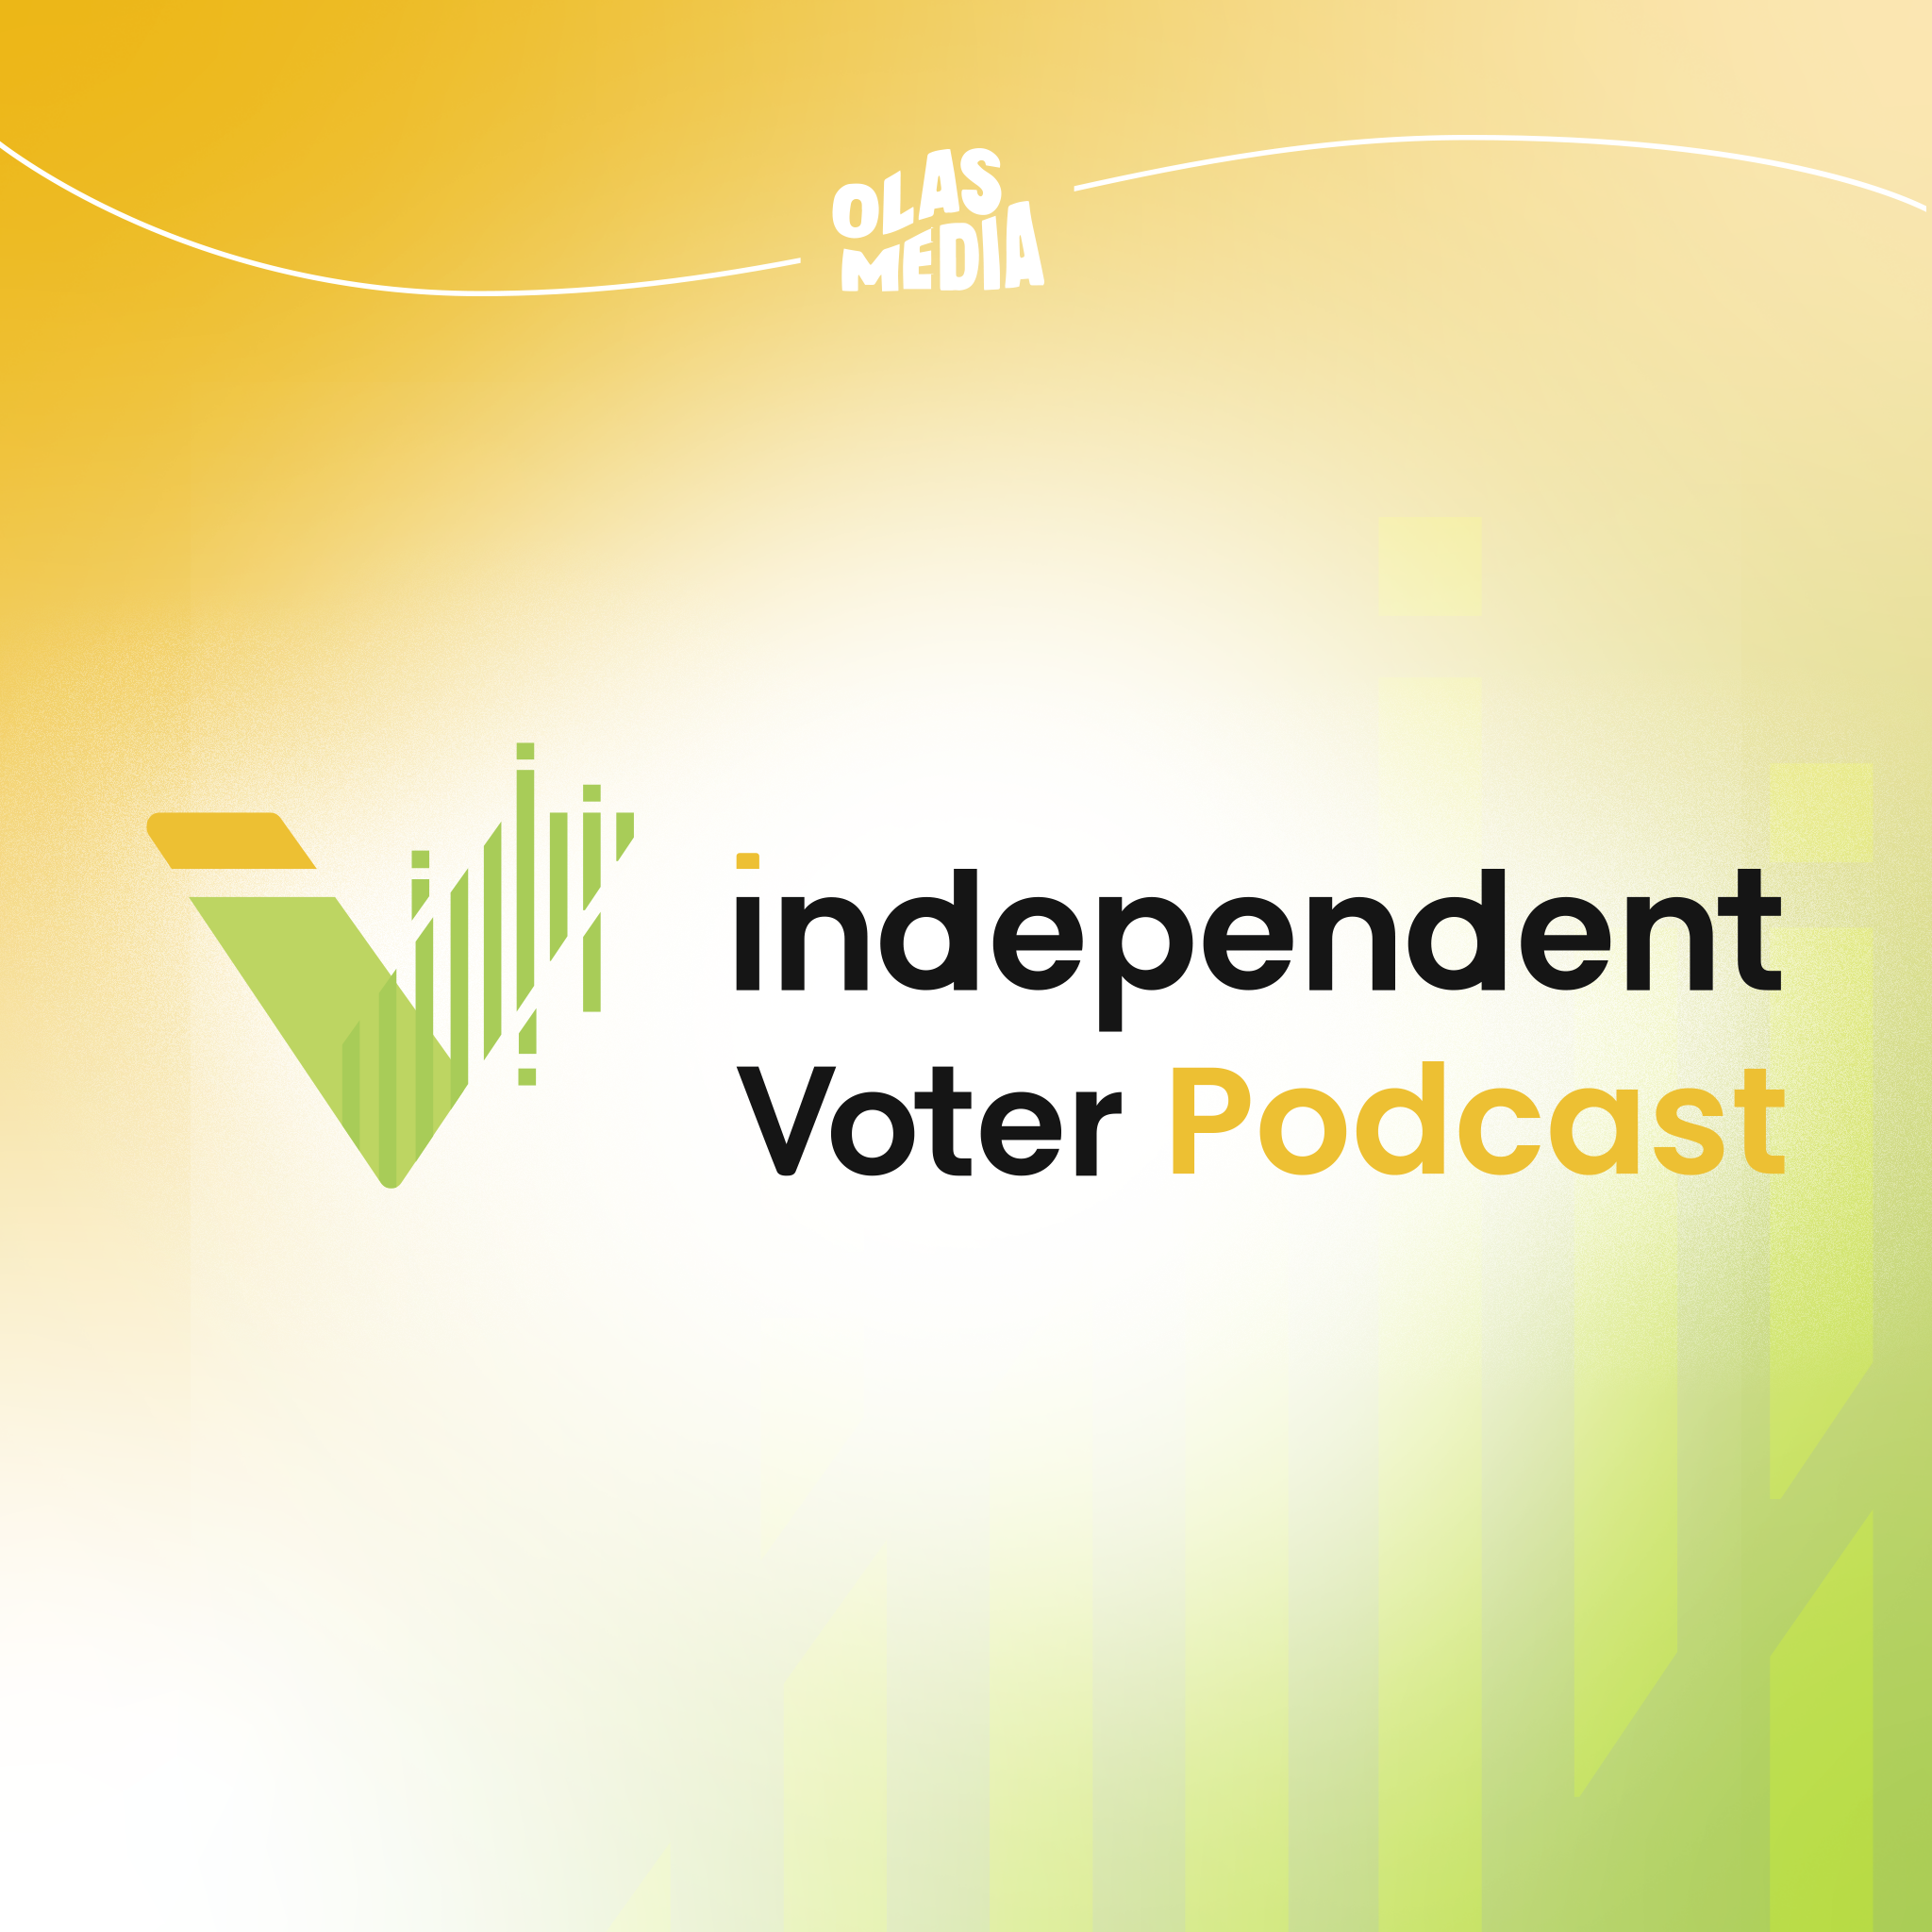 Independent Voter Podcast